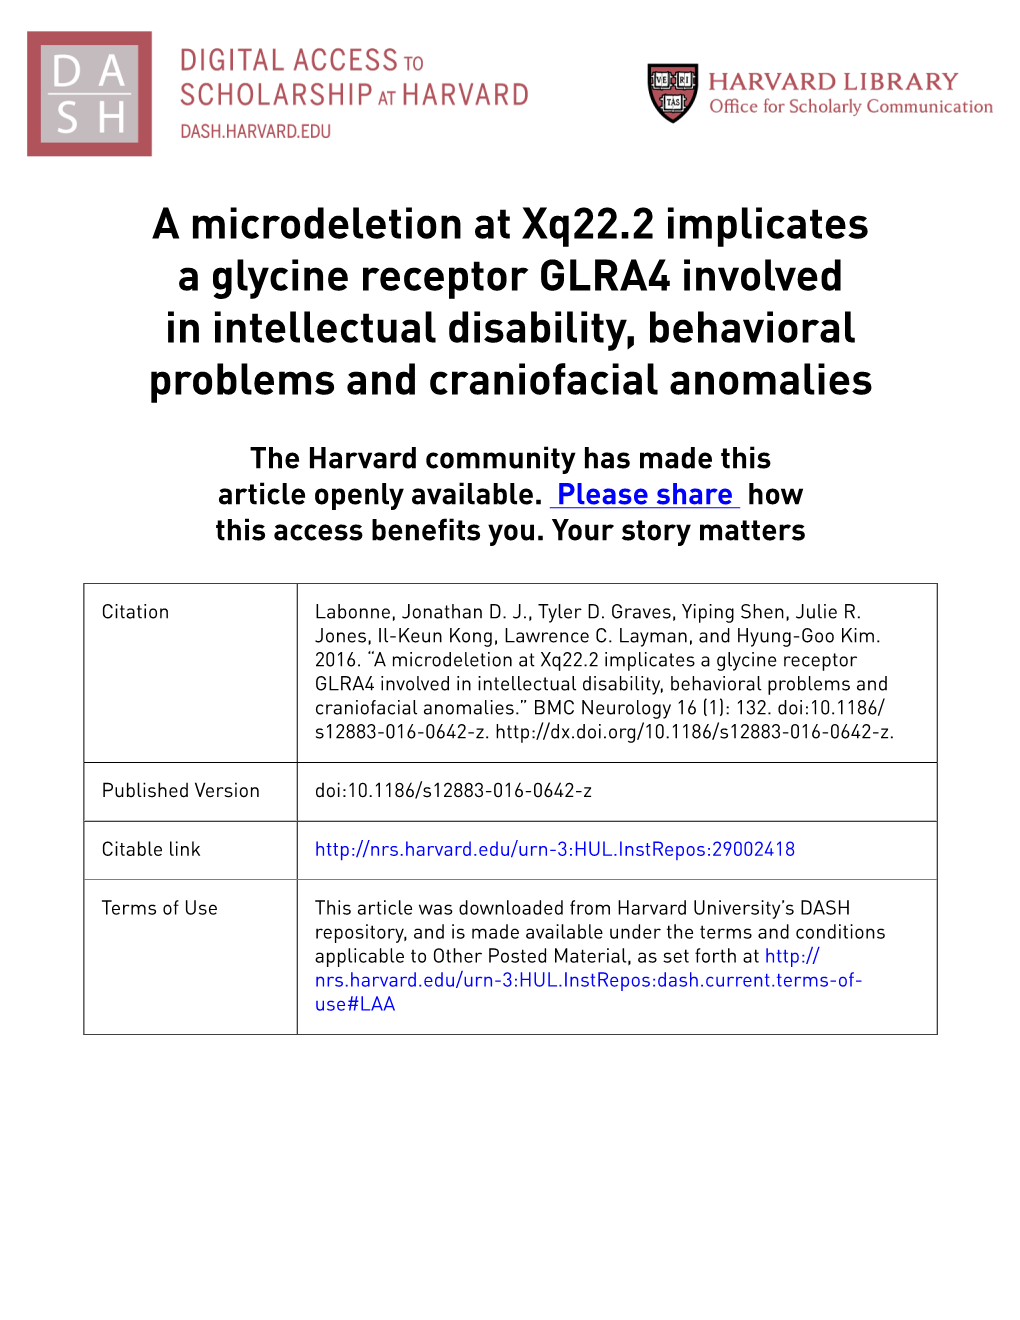 A Microdeletion at Xq22.2 Implicates a Glycine Receptor GLRA4 Involved in Intellectual Disability, Behavioral Problems and Craniofacial Anomalies